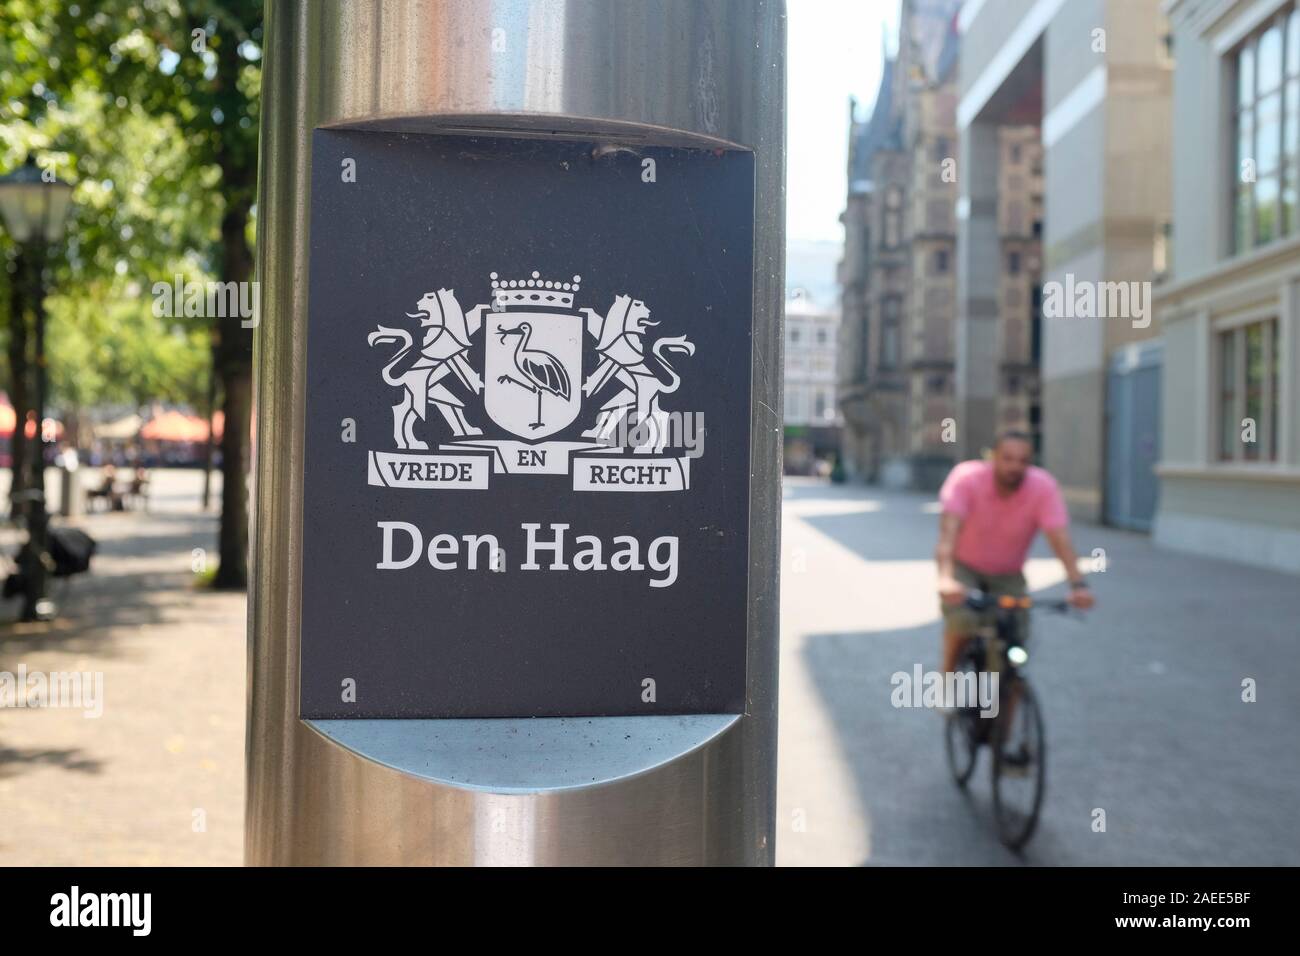 The official and current coat of arms of the City of The Hague as shown on a rising traffic bollard in front of parliament building (tweede kamer). Stock Photo